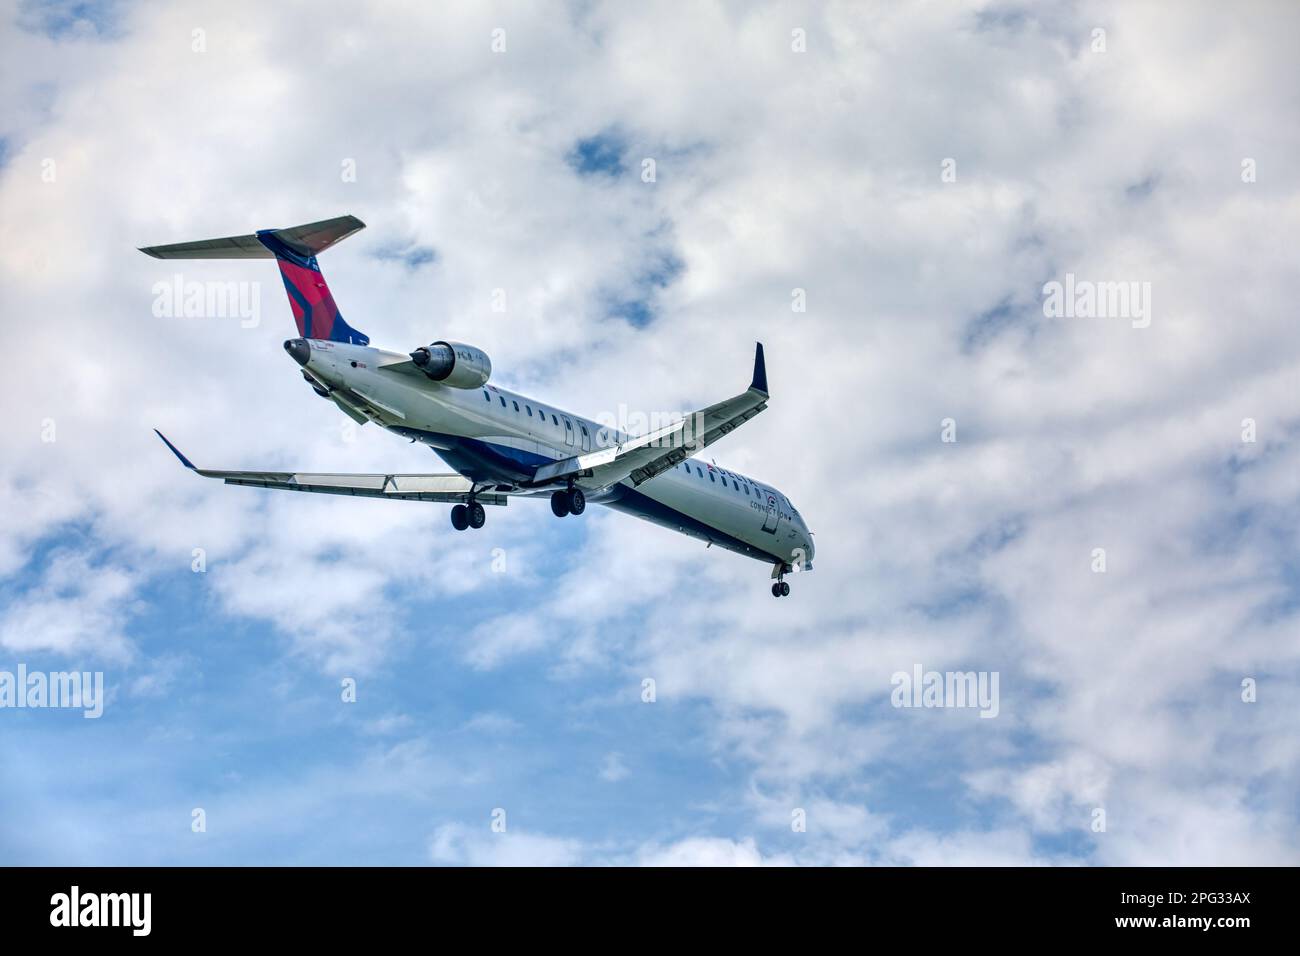 A Delta Connection Bombardier CRJ-900 twin-engine passenger jet approaches and lands at LaGuardia Airport runway 22 in East Elmhurst, Queens. Stock Photo